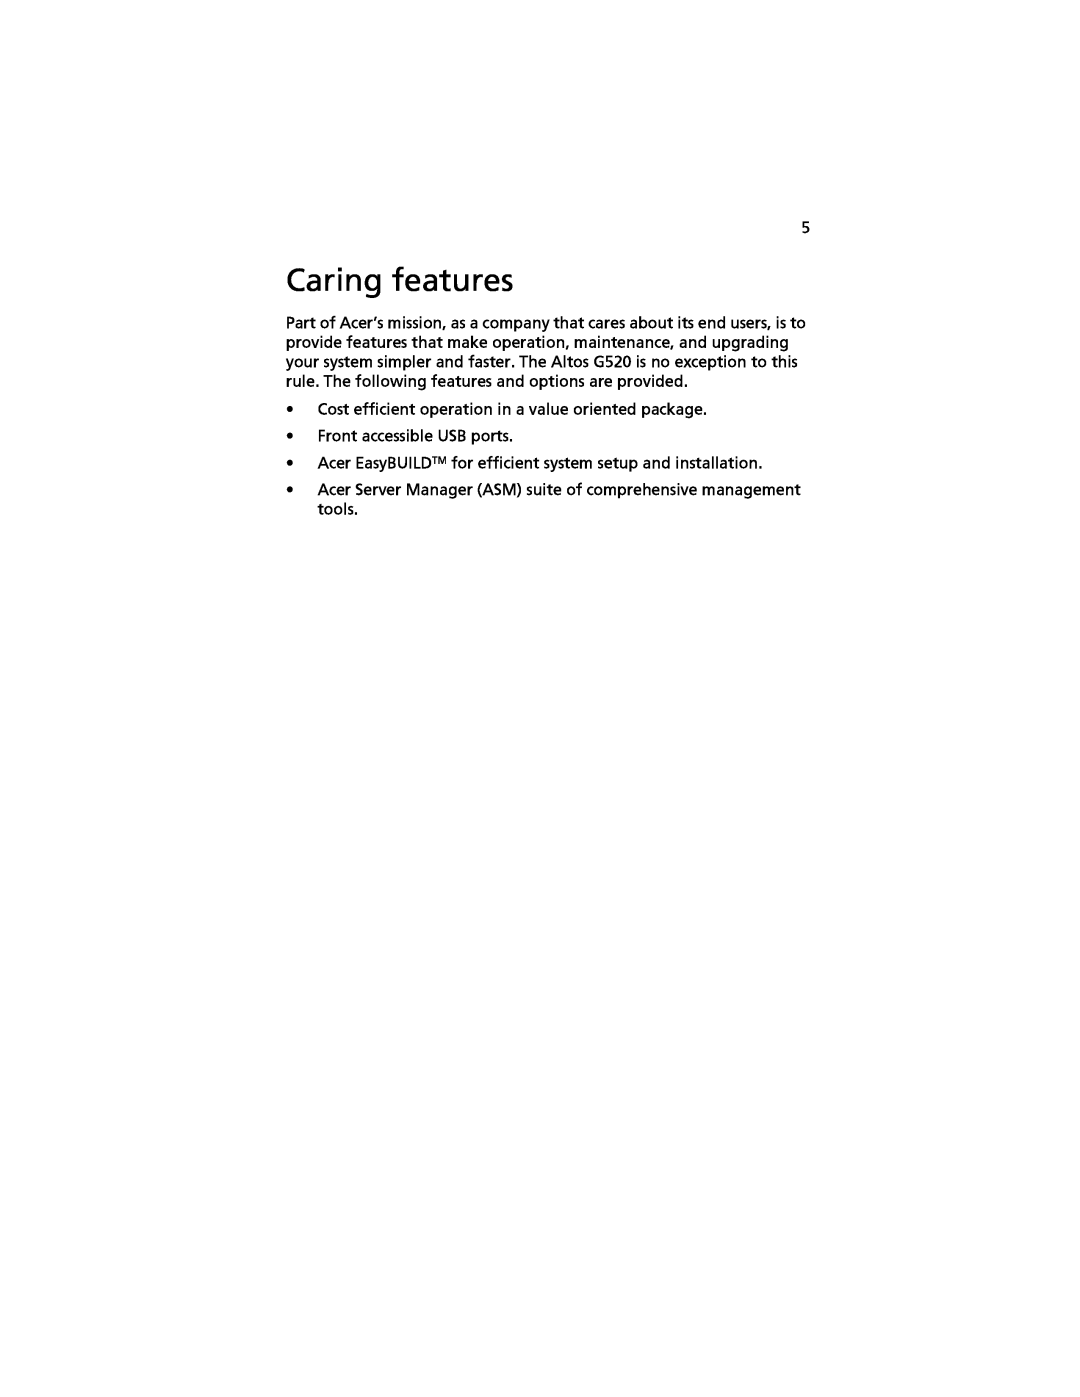 Acer G520 series manual Caring features 